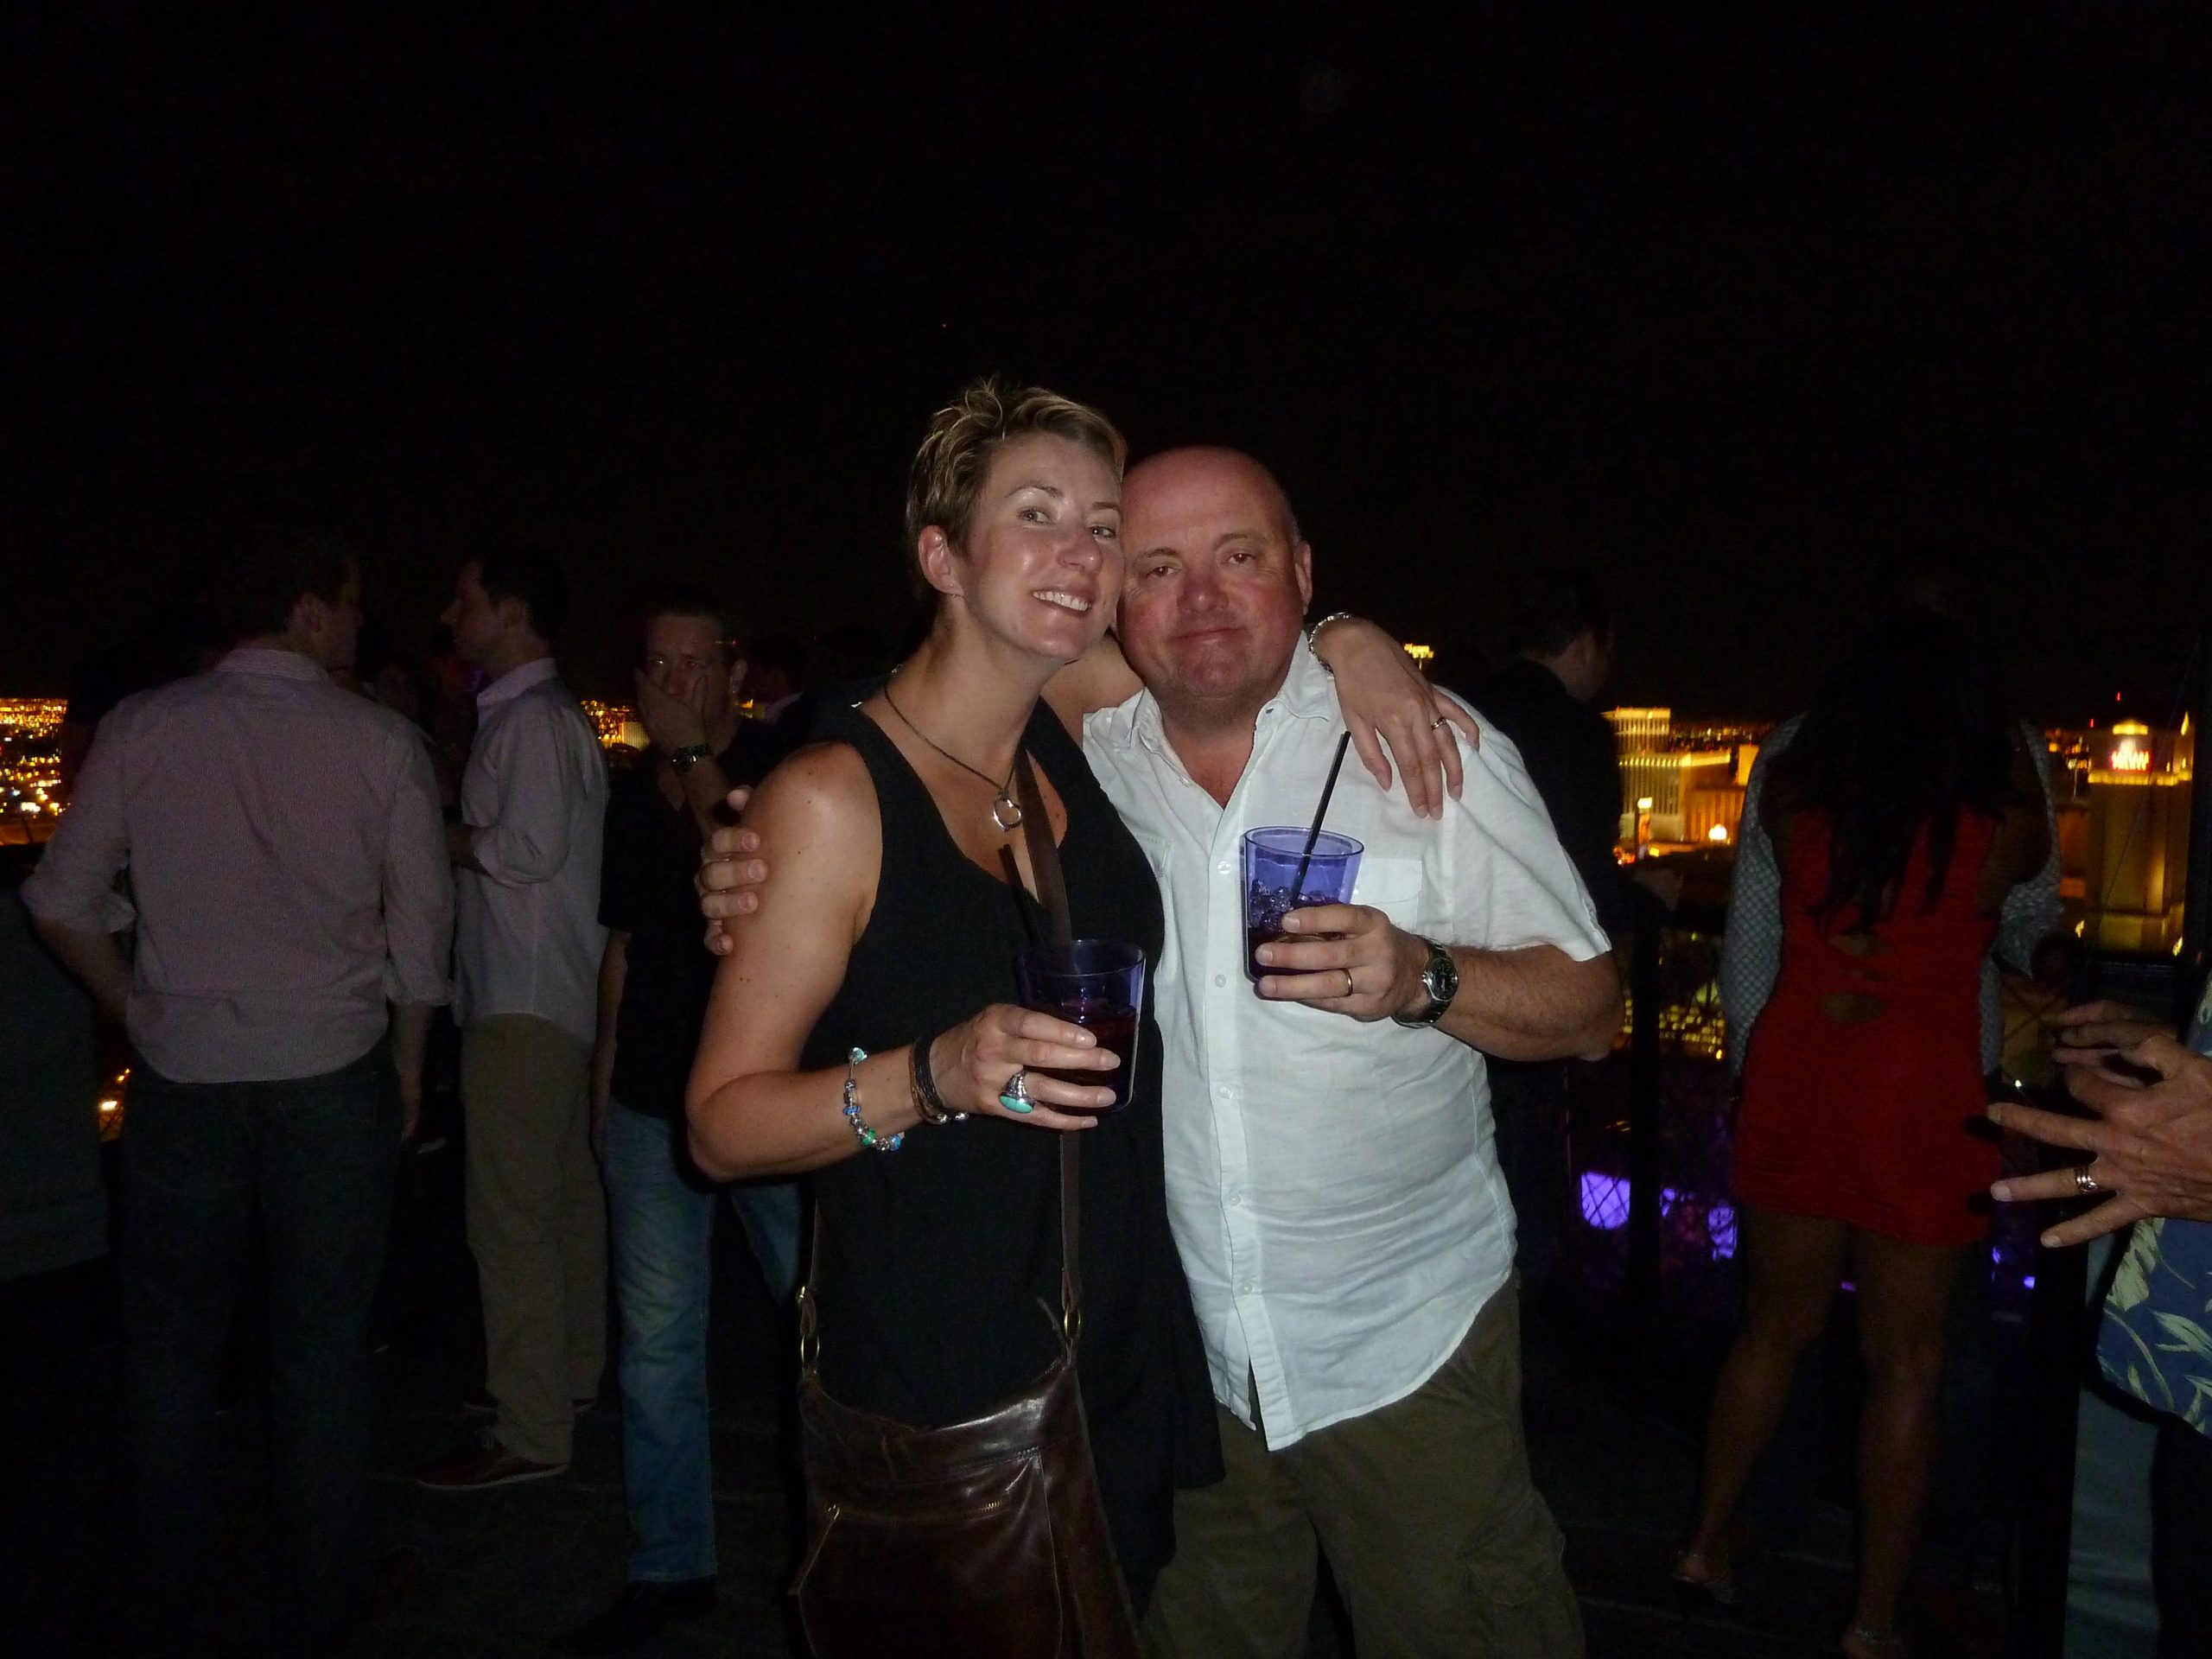 A blonde woman and a man standing in a bar holding cocktails surrounded by people and flickering lights